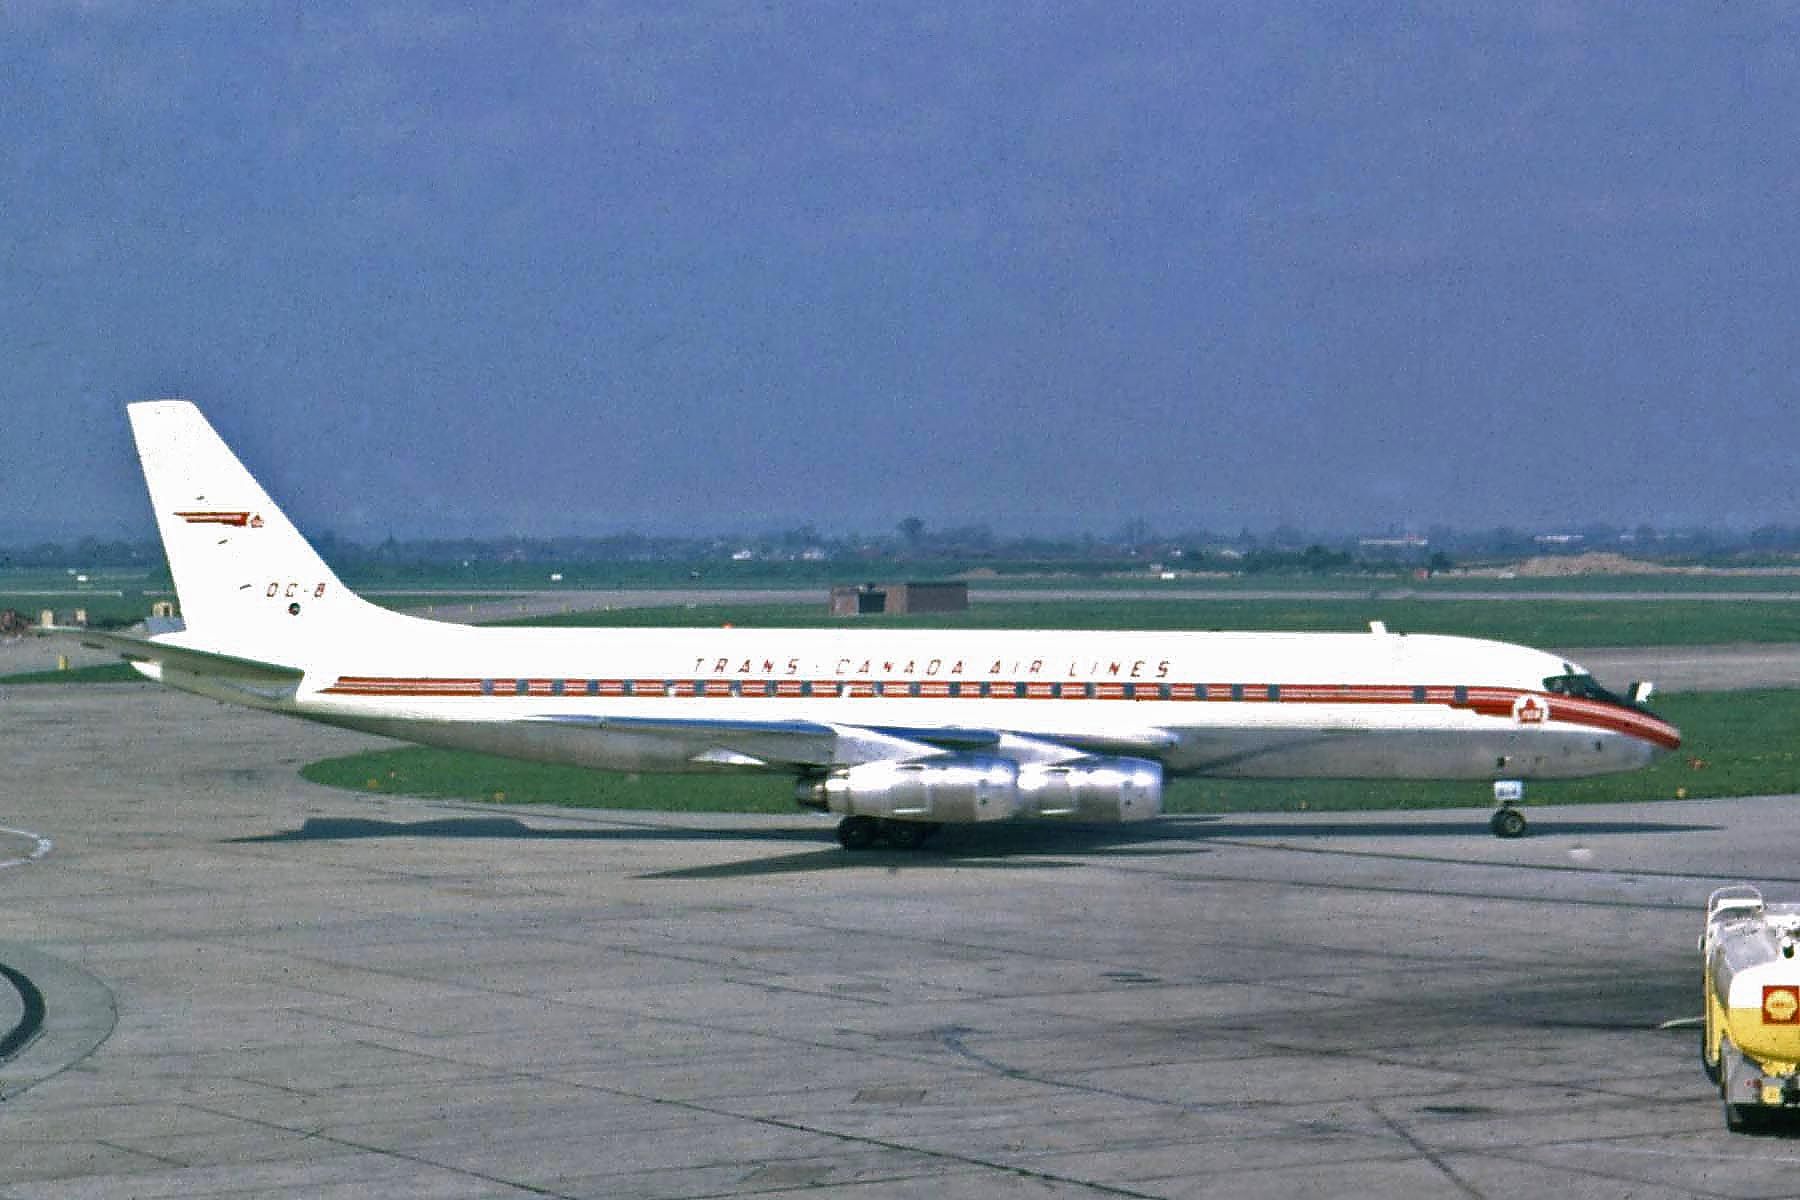 Trans Canada Airlines DC-8 at London Heathrow Airport in May 1963